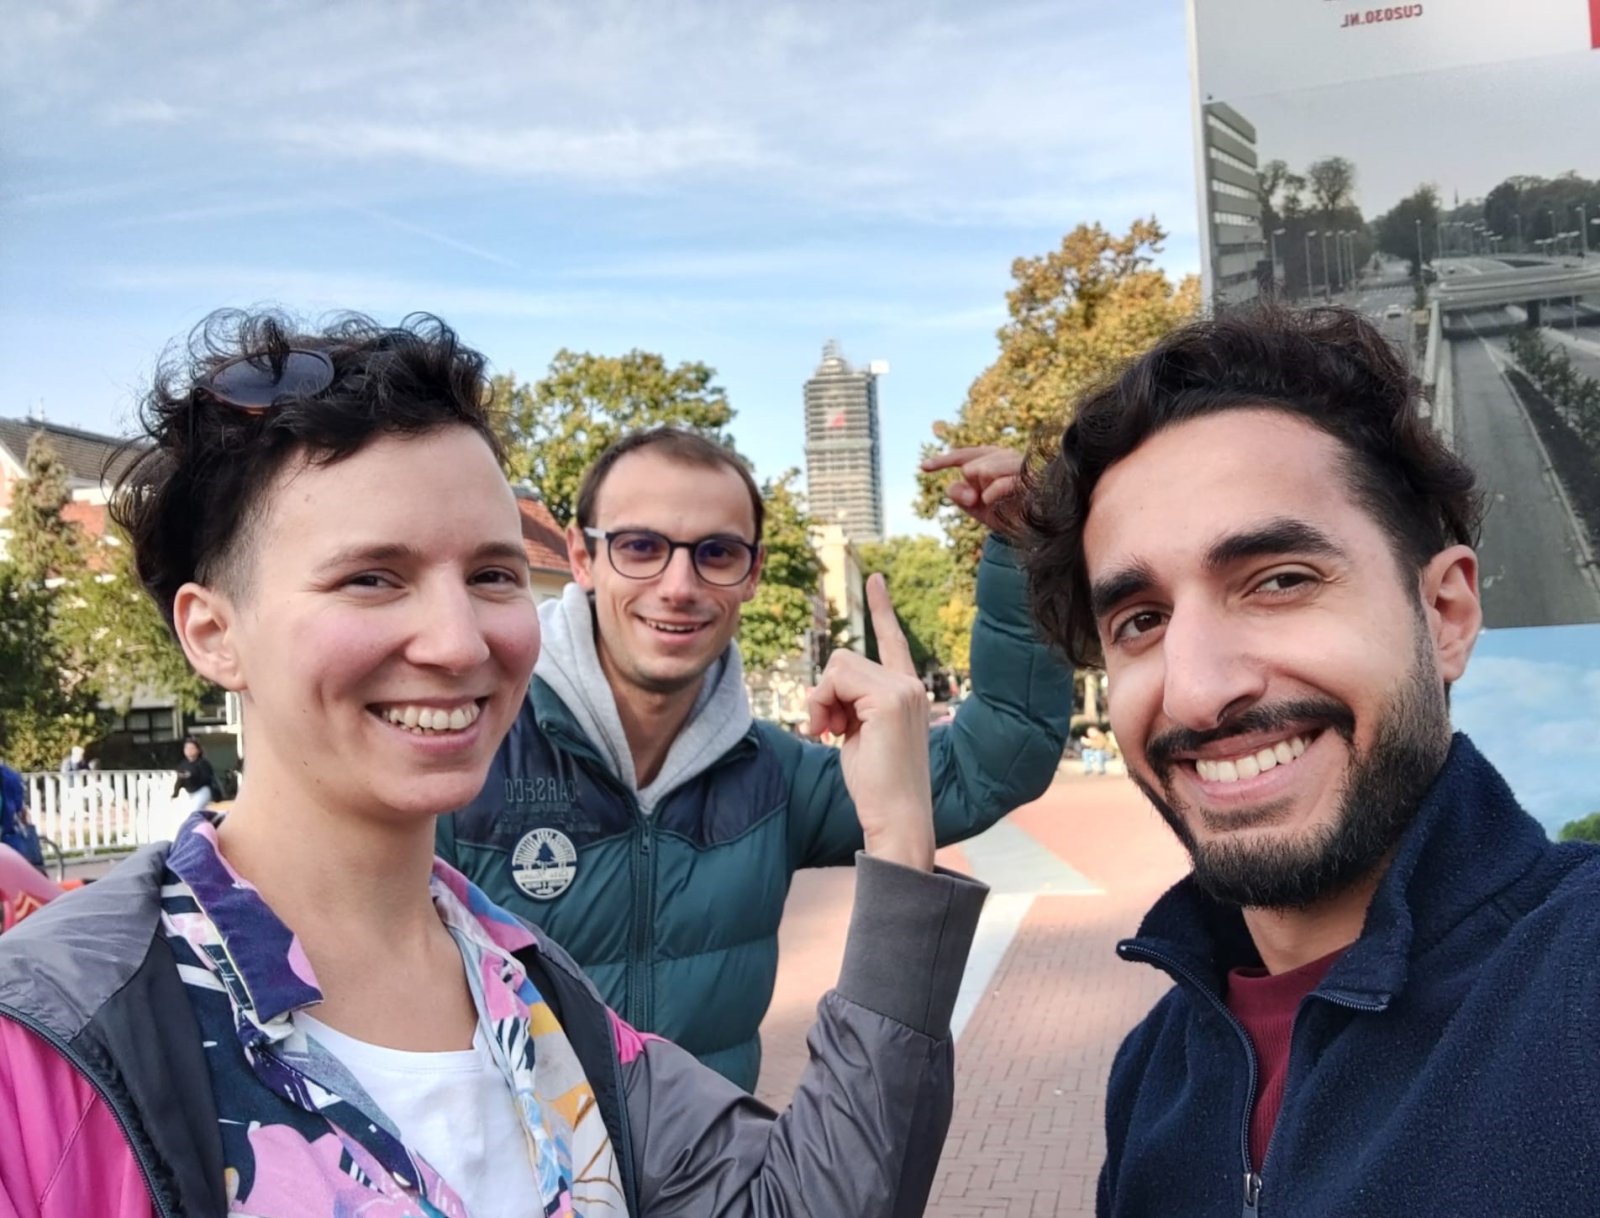 Three students during the event Utrecht Photo Hunt took a selfie with the Dom tower